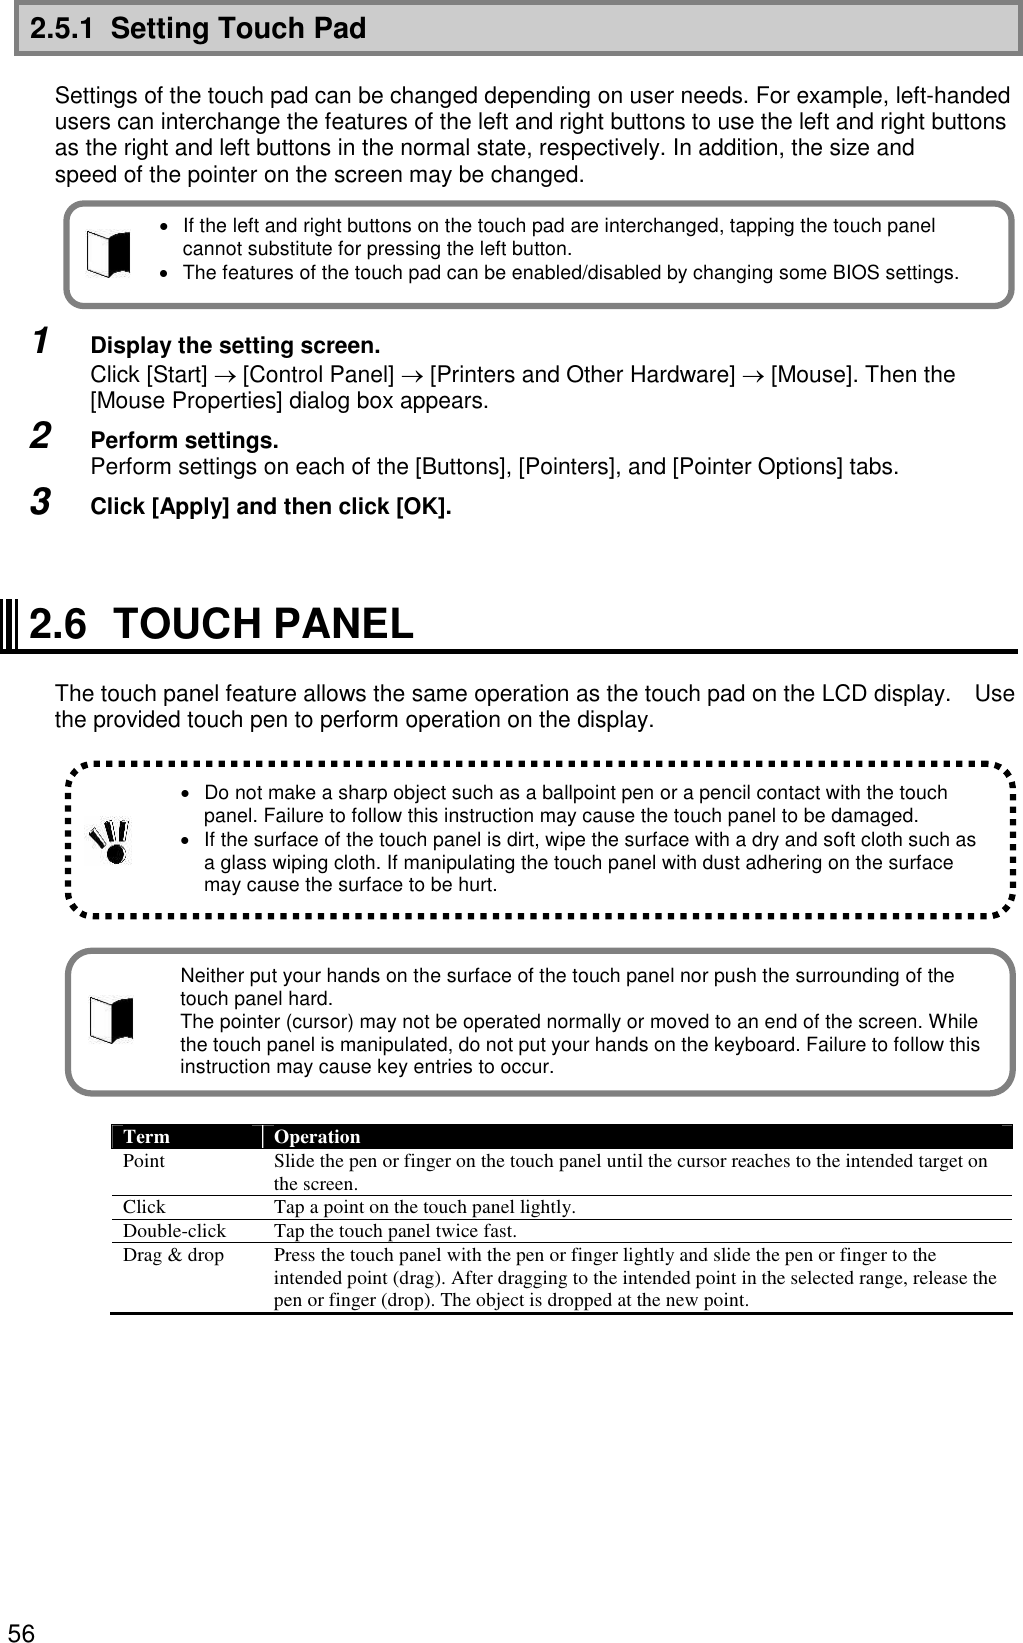 56 2.5.1  Setting Touch Pad  Settings of the touch pad can be changed depending on user needs. For example, left-handed users can interchange the features of the left and right buttons to use the left and right buttons as the right and left buttons in the normal state, respectively. In addition, the size and speed of the pointer on the screen may be changed.      1  Display the setting screen. Click [Start]  [Control Panel]  [Printers and Other Hardware]  [Mouse]. Then the [Mouse Properties] dialog box appears. 2  Perform settings. Perform settings on each of the [Buttons], [Pointers], and [Pointer Options] tabs. 3  Click [Apply] and then click [OK].    2.6  TOUCH PANEL  The touch panel feature allows the same operation as the touch pad on the LCD display.  Use the provided touch pen to perform operation on the display.                Term  Operation Point  Slide the pen or finger on the touch panel until the cursor reaches to the intended target on the screen. Click  Tap a point on the touch panel lightly. Double-click  Tap the touch panel twice fast. Drag &amp; drop  Press the touch panel with the pen or finger lightly and slide the pen or finger to the intended point (drag). After dragging to the intended point in the selected range, release the pen or finger (drop). The object is dropped at the new point.    If the left and right buttons on the touch pad are interchanged, tapping the touch panel cannot substitute for pressing the left button.   The features of the touch pad can be enabled/disabled by changing some BIOS settings.   Do not make a sharp object such as a ballpoint pen or a pencil contact with the touch panel. Failure to follow this instruction may cause the touch panel to be damaged.   If the surface of the touch panel is dirt, wipe the surface with a dry and soft cloth such as a glass wiping cloth. If manipulating the touch panel with dust adhering on the surface may cause the surface to be hurt. Neither put your hands on the surface of the touch panel nor push the surrounding of the touch panel hard. The pointer (cursor) may not be operated normally or moved to an end of the screen. While the touch panel is manipulated, do not put your hands on the keyboard. Failure to follow this instruction may cause key entries to occur. 